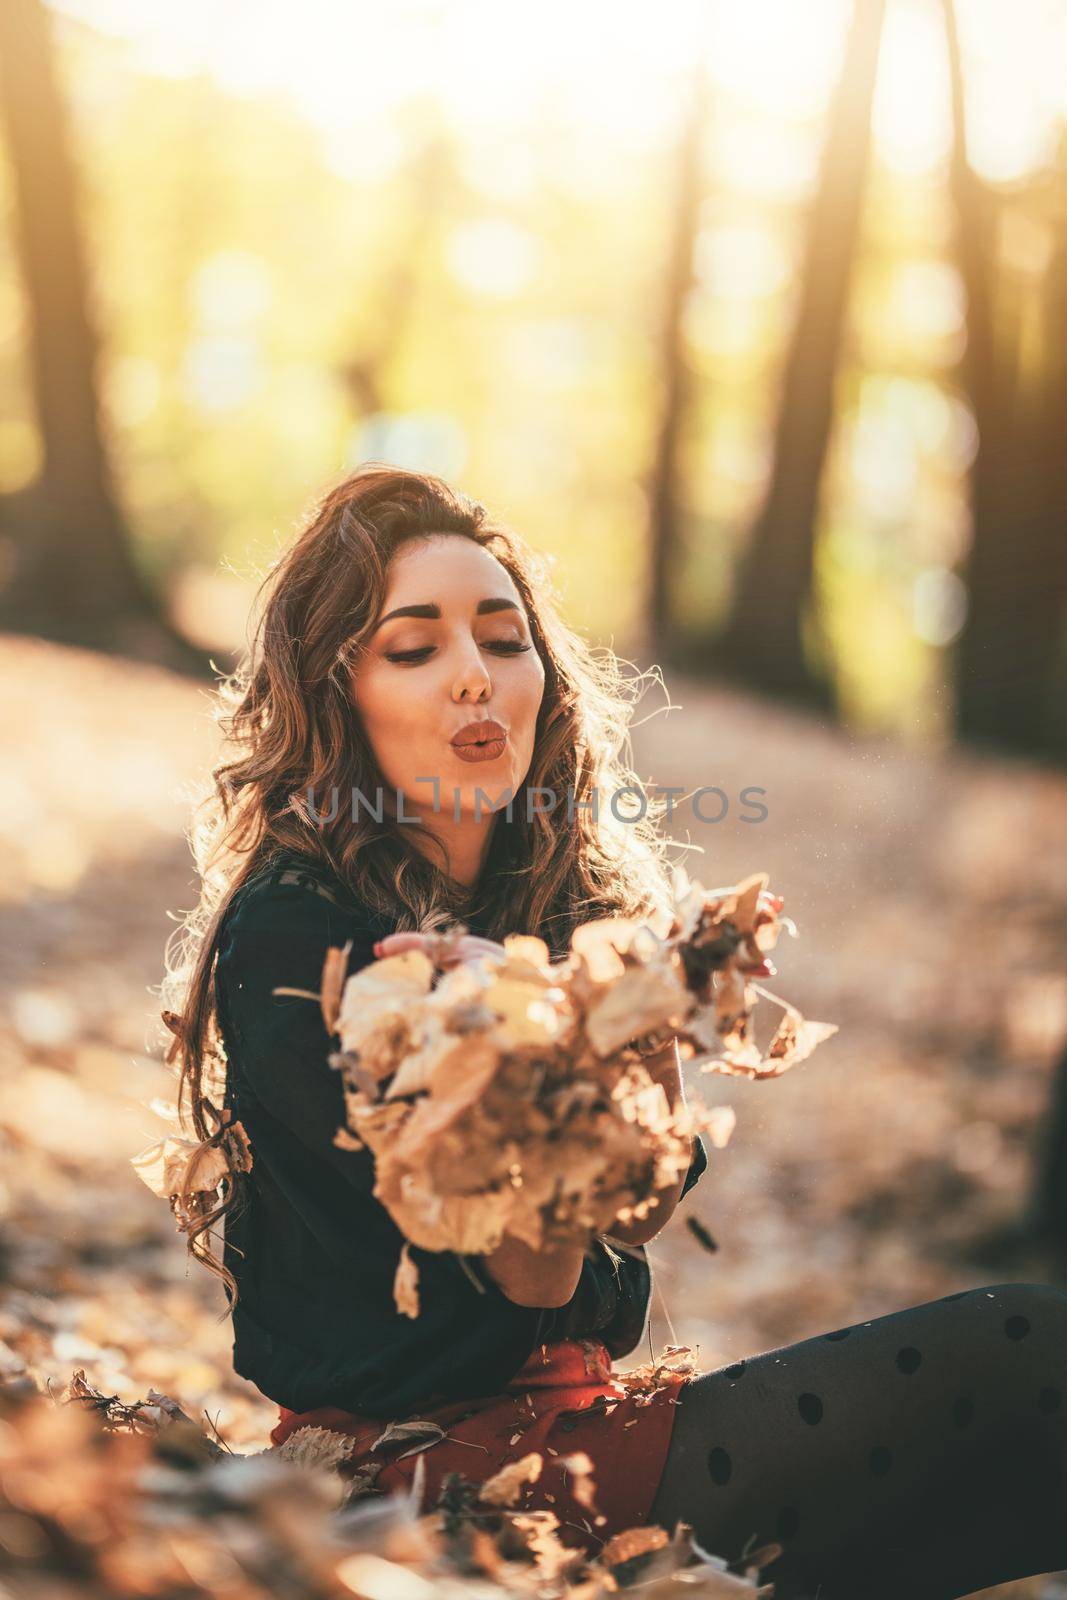 Cute young woman enjoying in sunny forest in autumn colors. She is holding golden yellow leaves, blowing on.